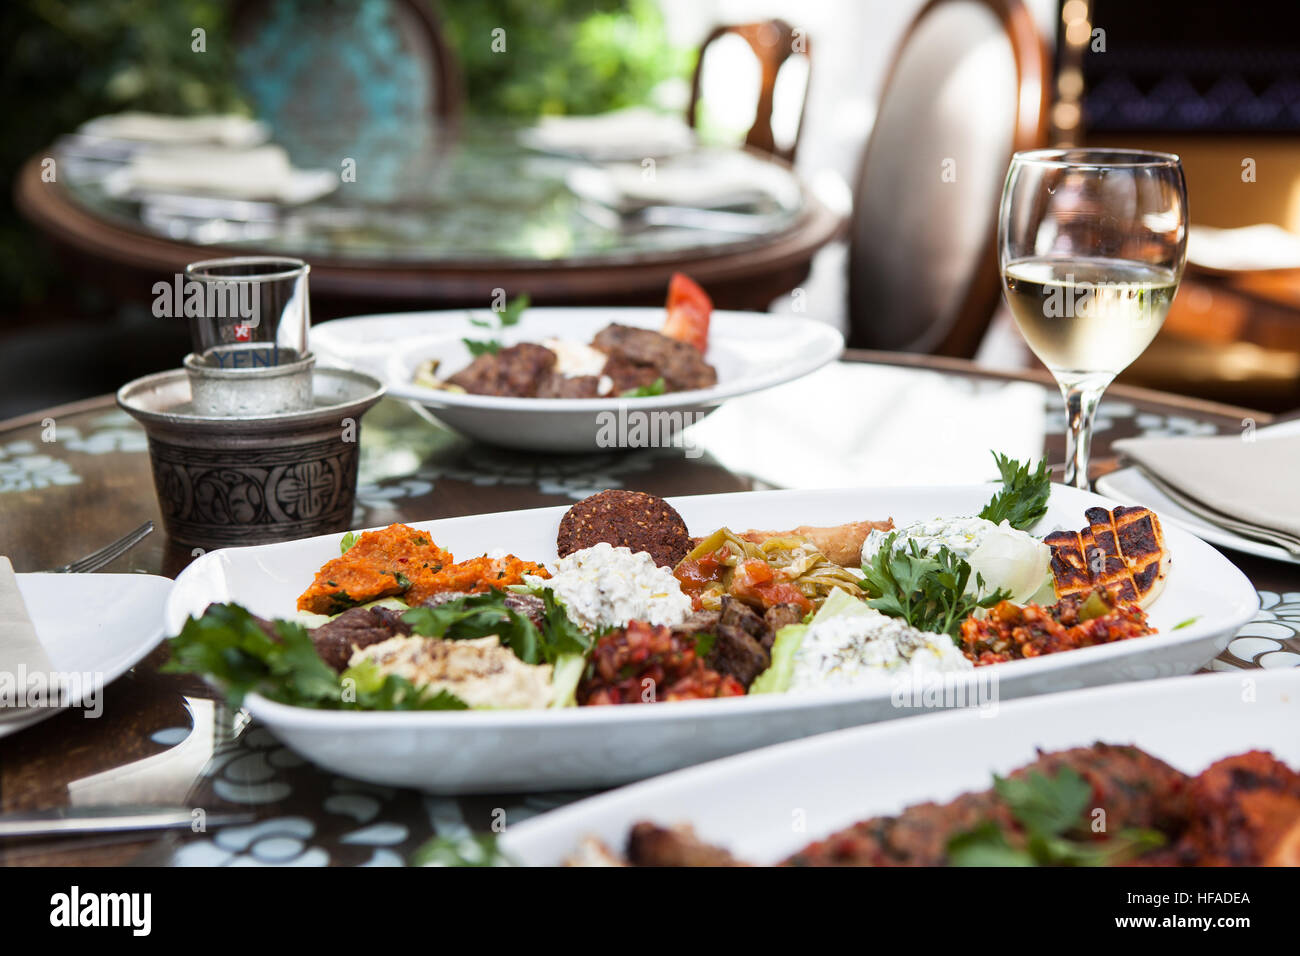 Turkish food on a table in a restaurant Stock Photo